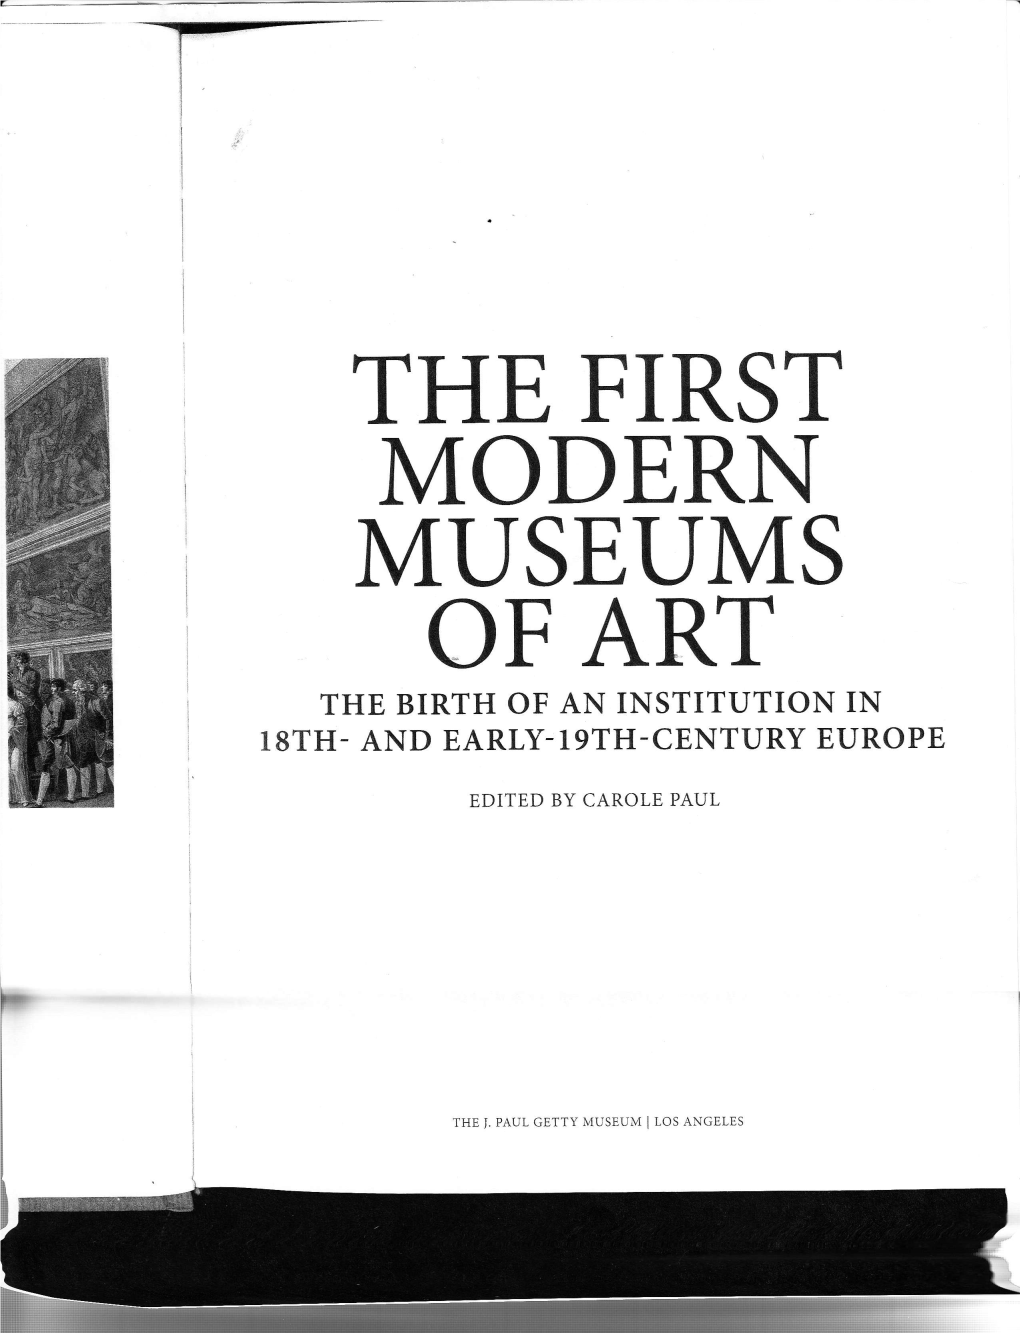 MODERI{ MUSETIMS of ART the BIRTH of an INSTITUTION in Lsth- and EARLY- 1Gth-CENTURY EUROPE